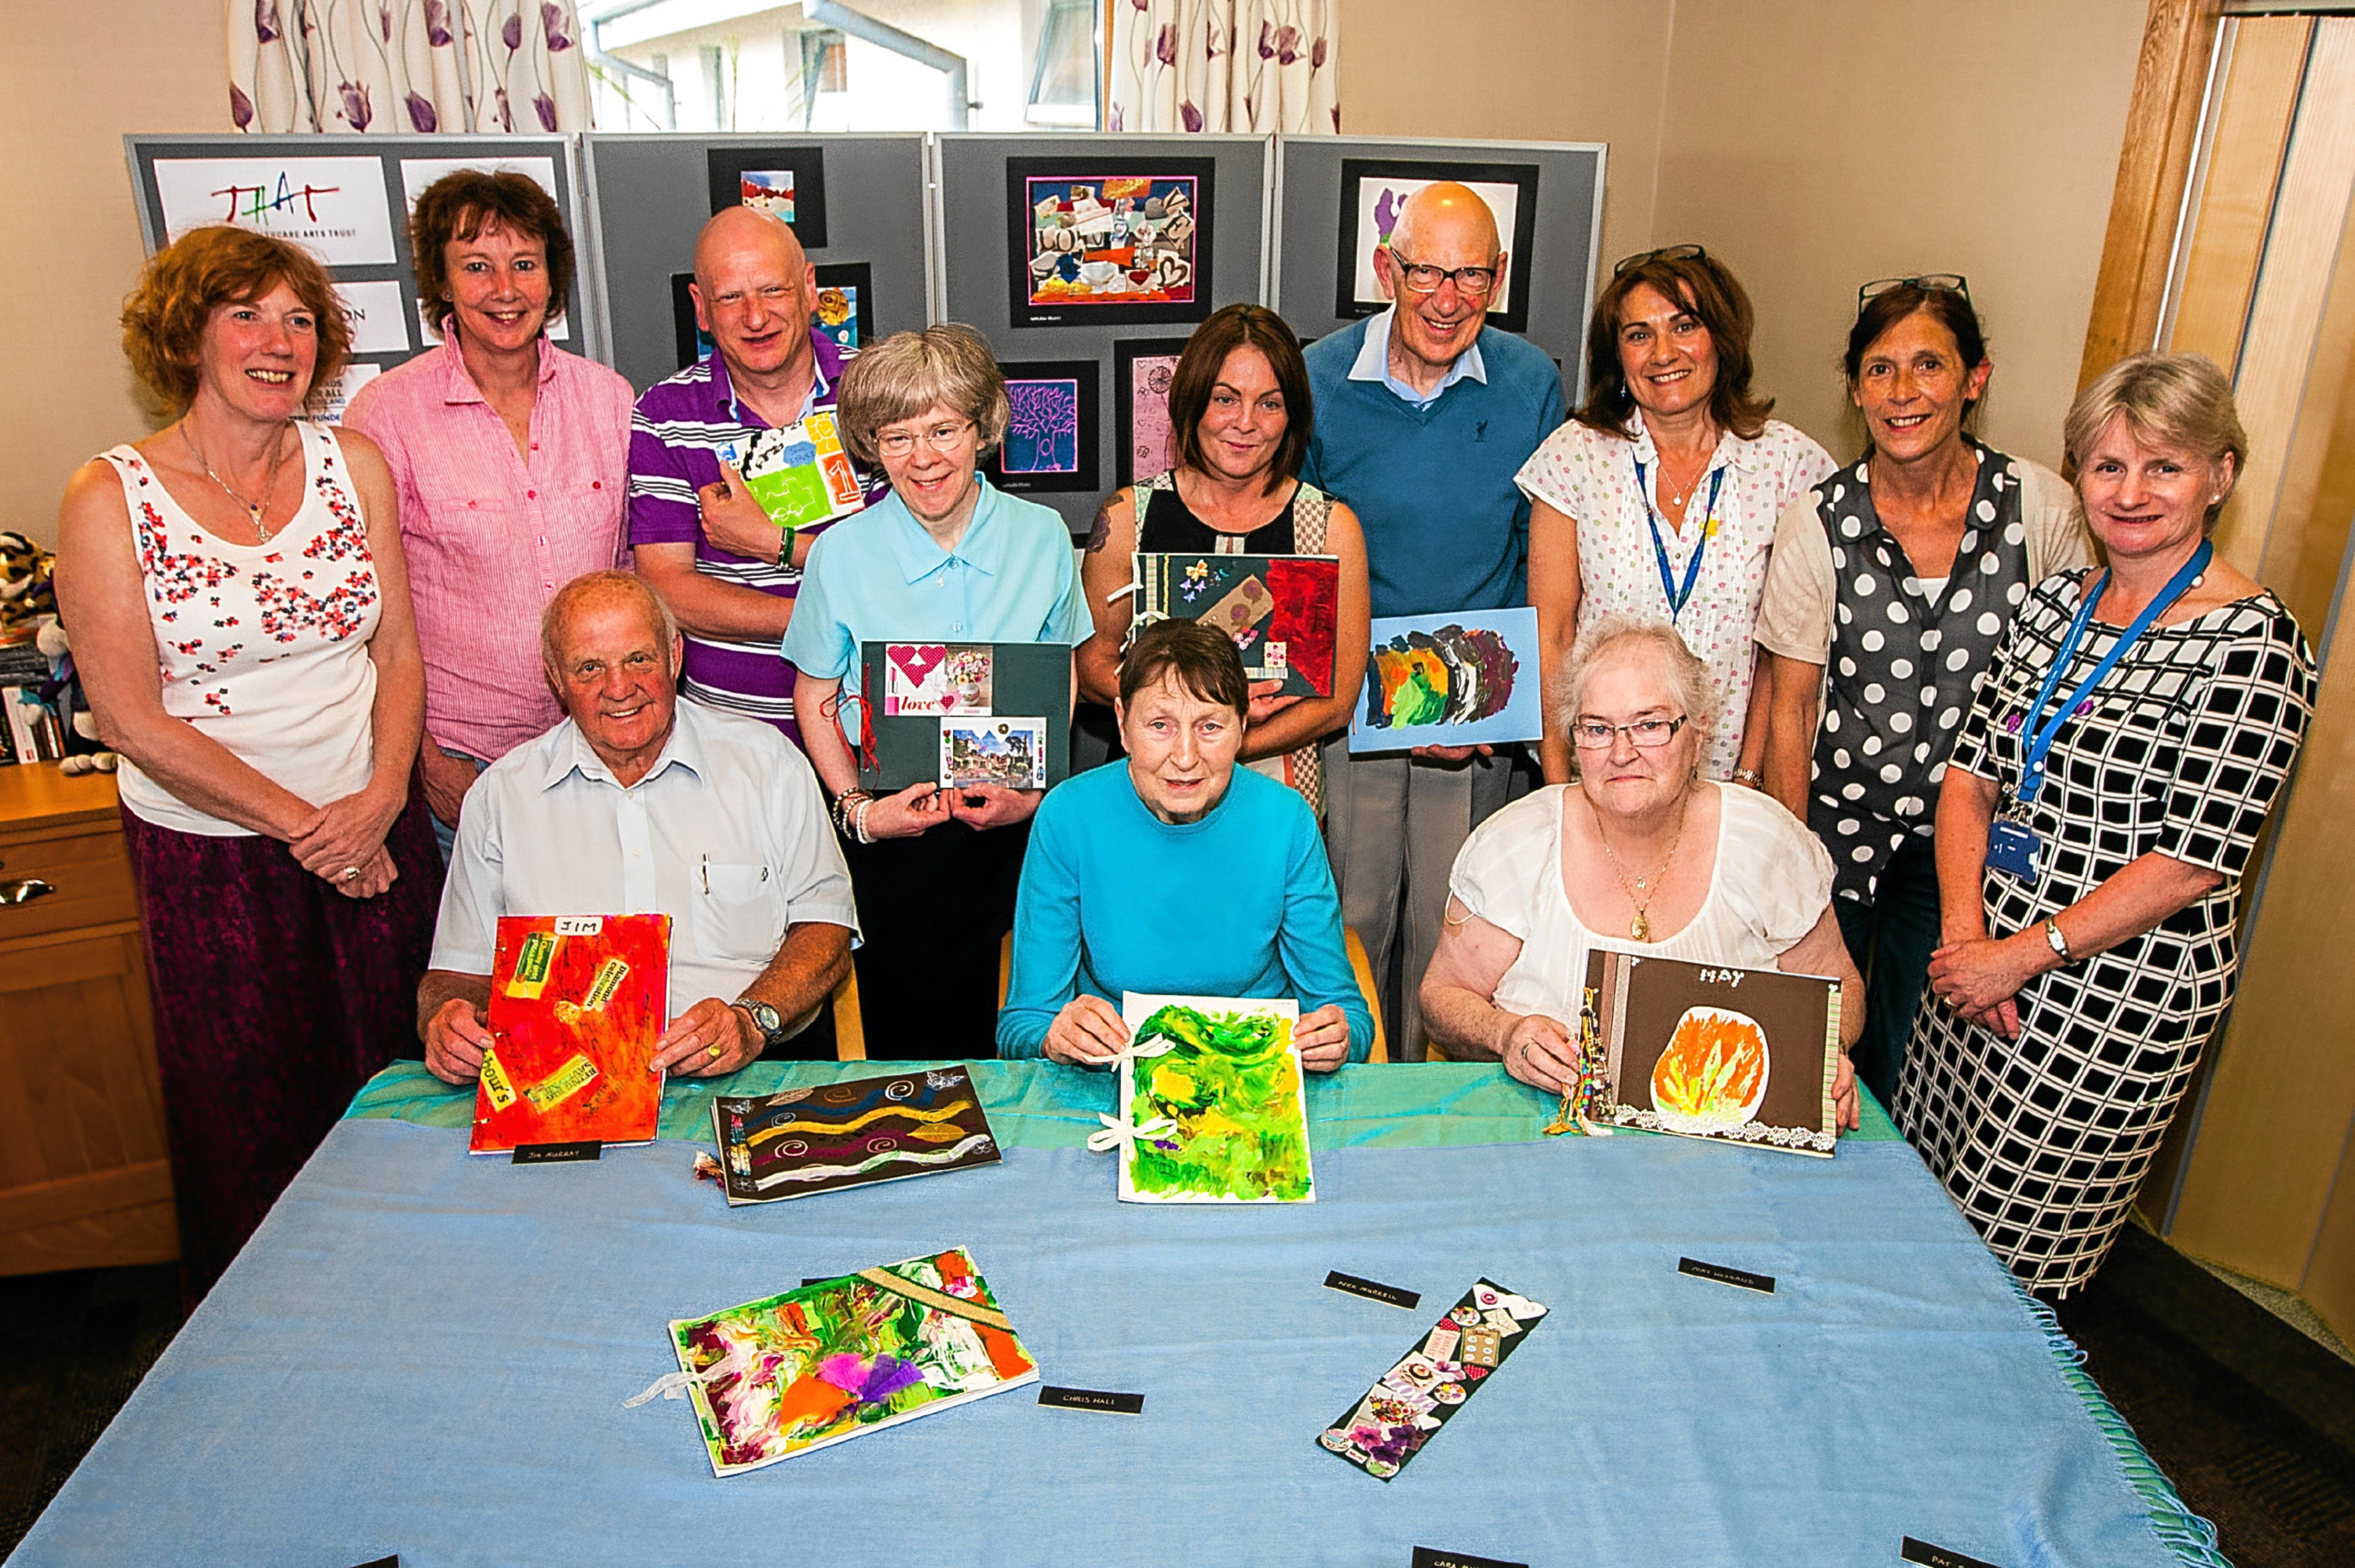 Cornhill Macmillan Centre in Perth is hosting a display of art by bereaved people.